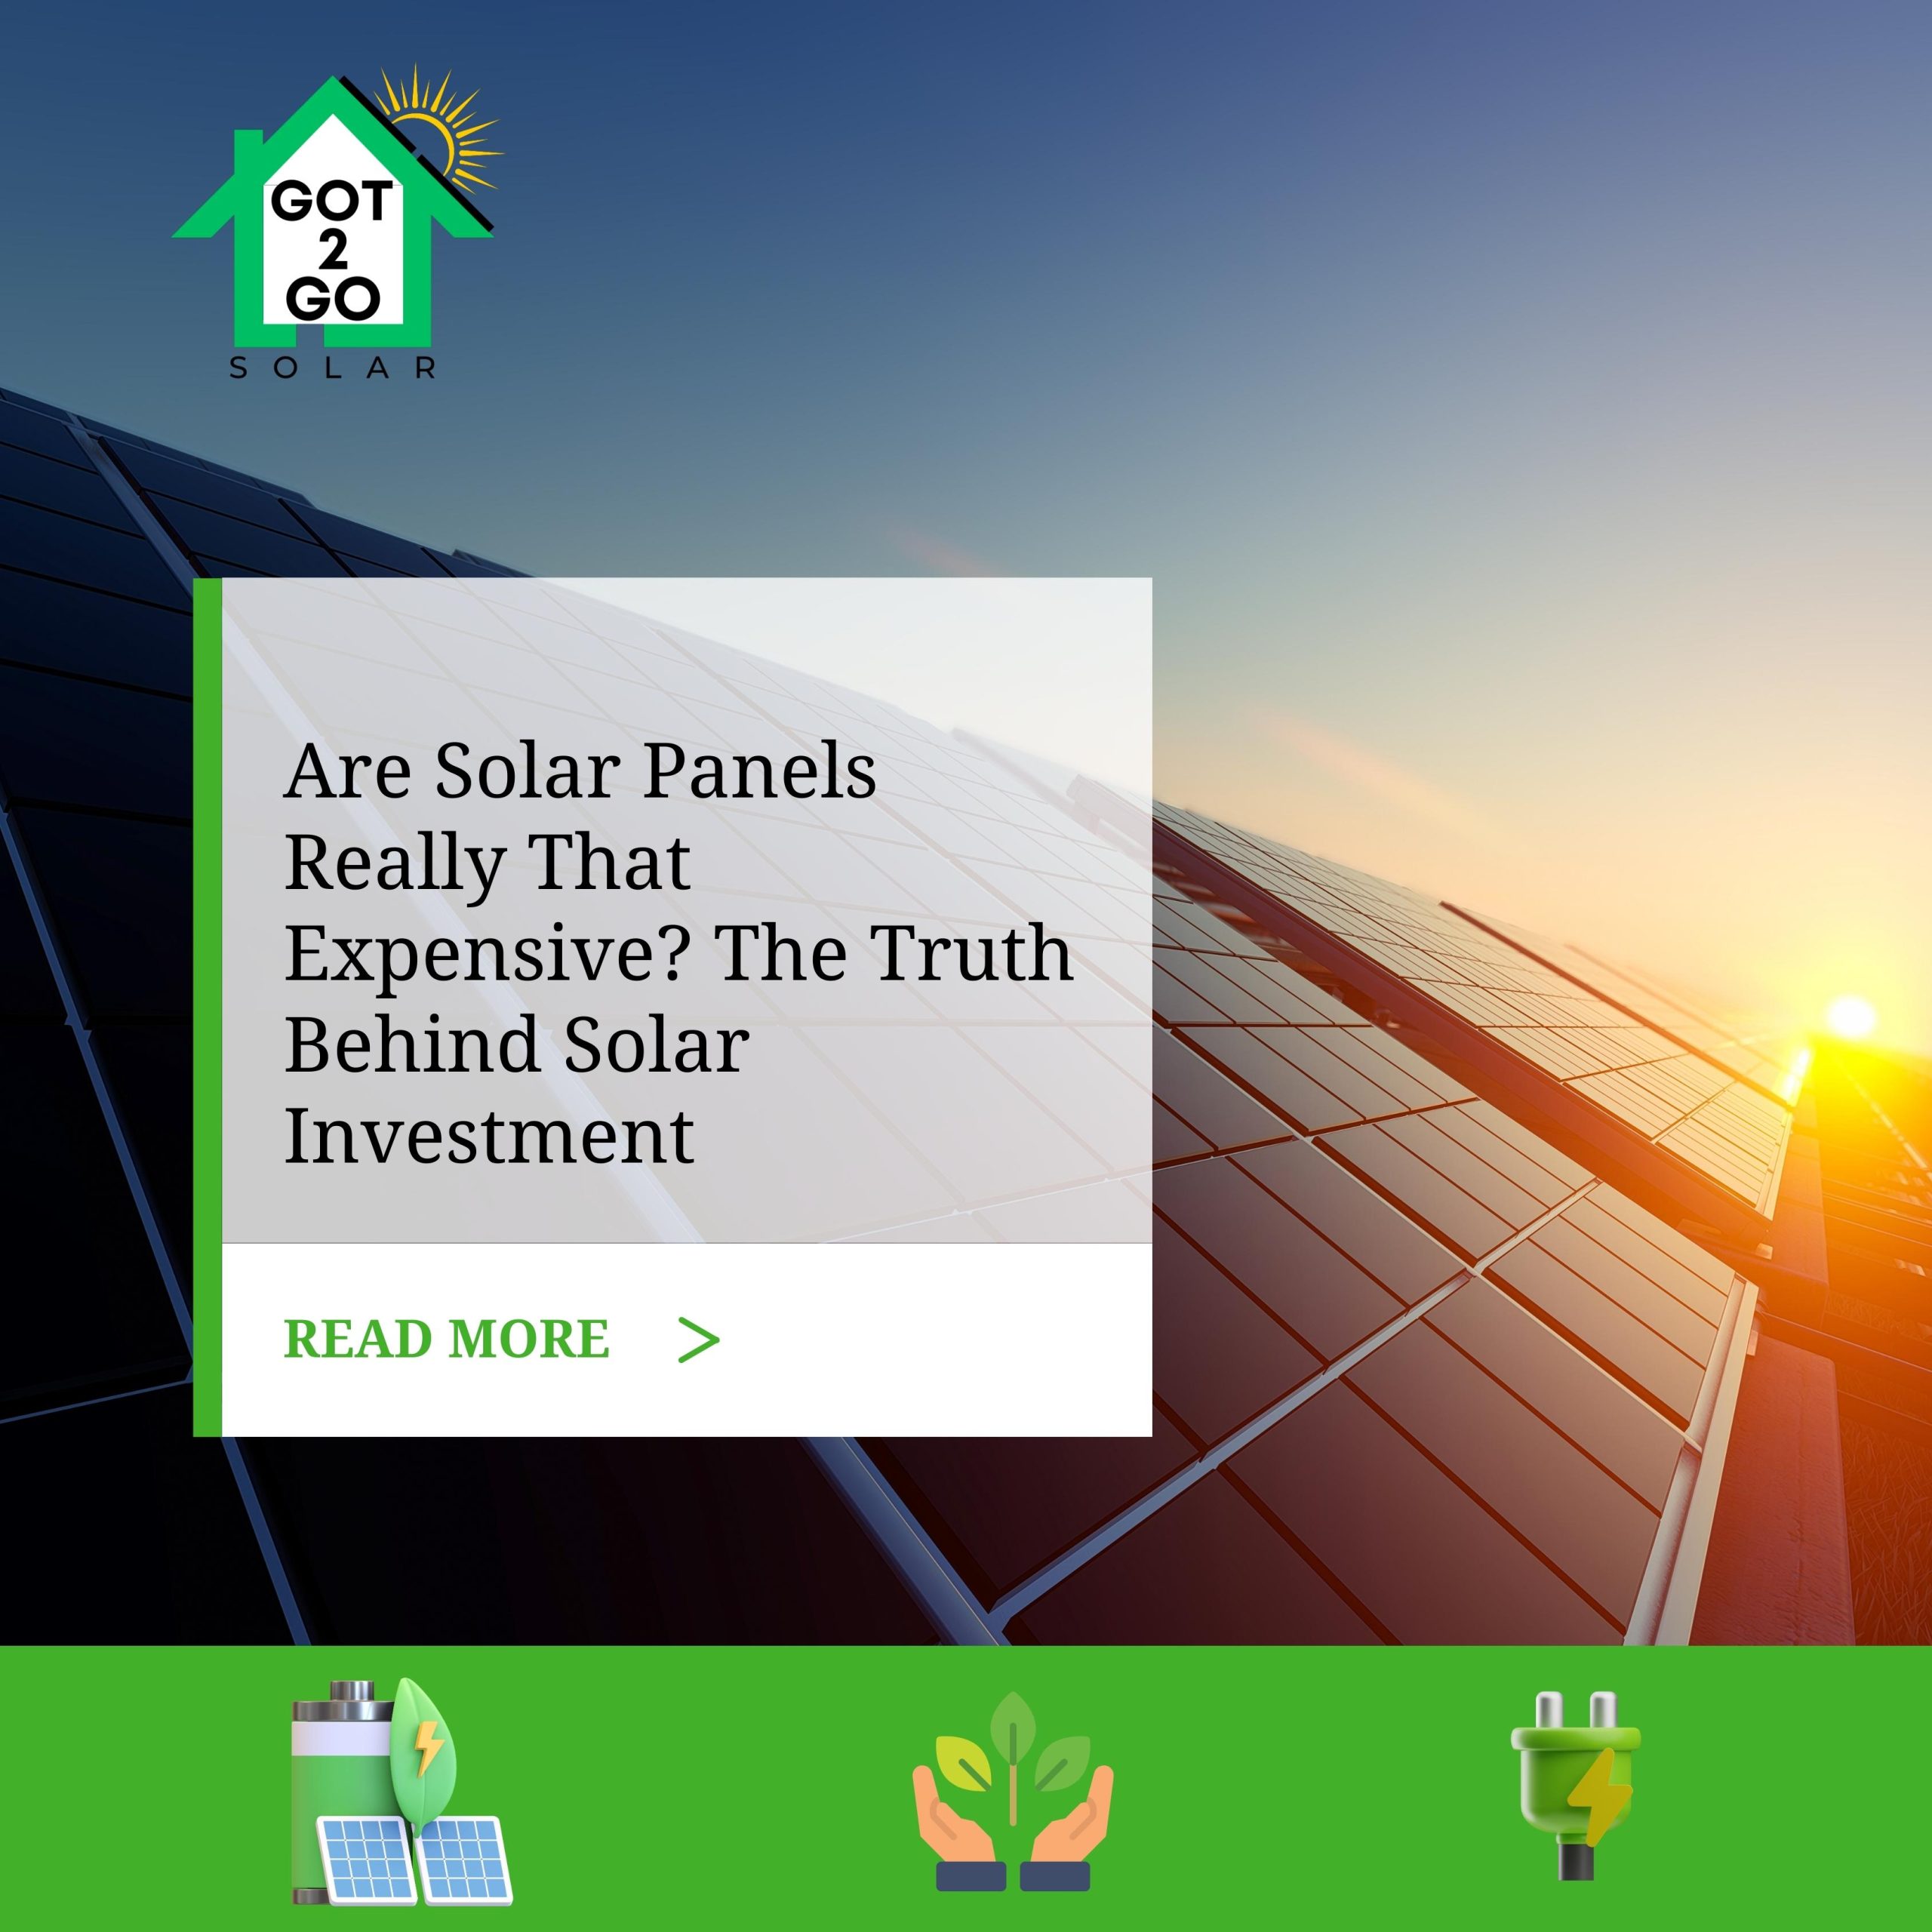 Are Solar Panels Really That Expensive? The Truth Behind Solar Investment